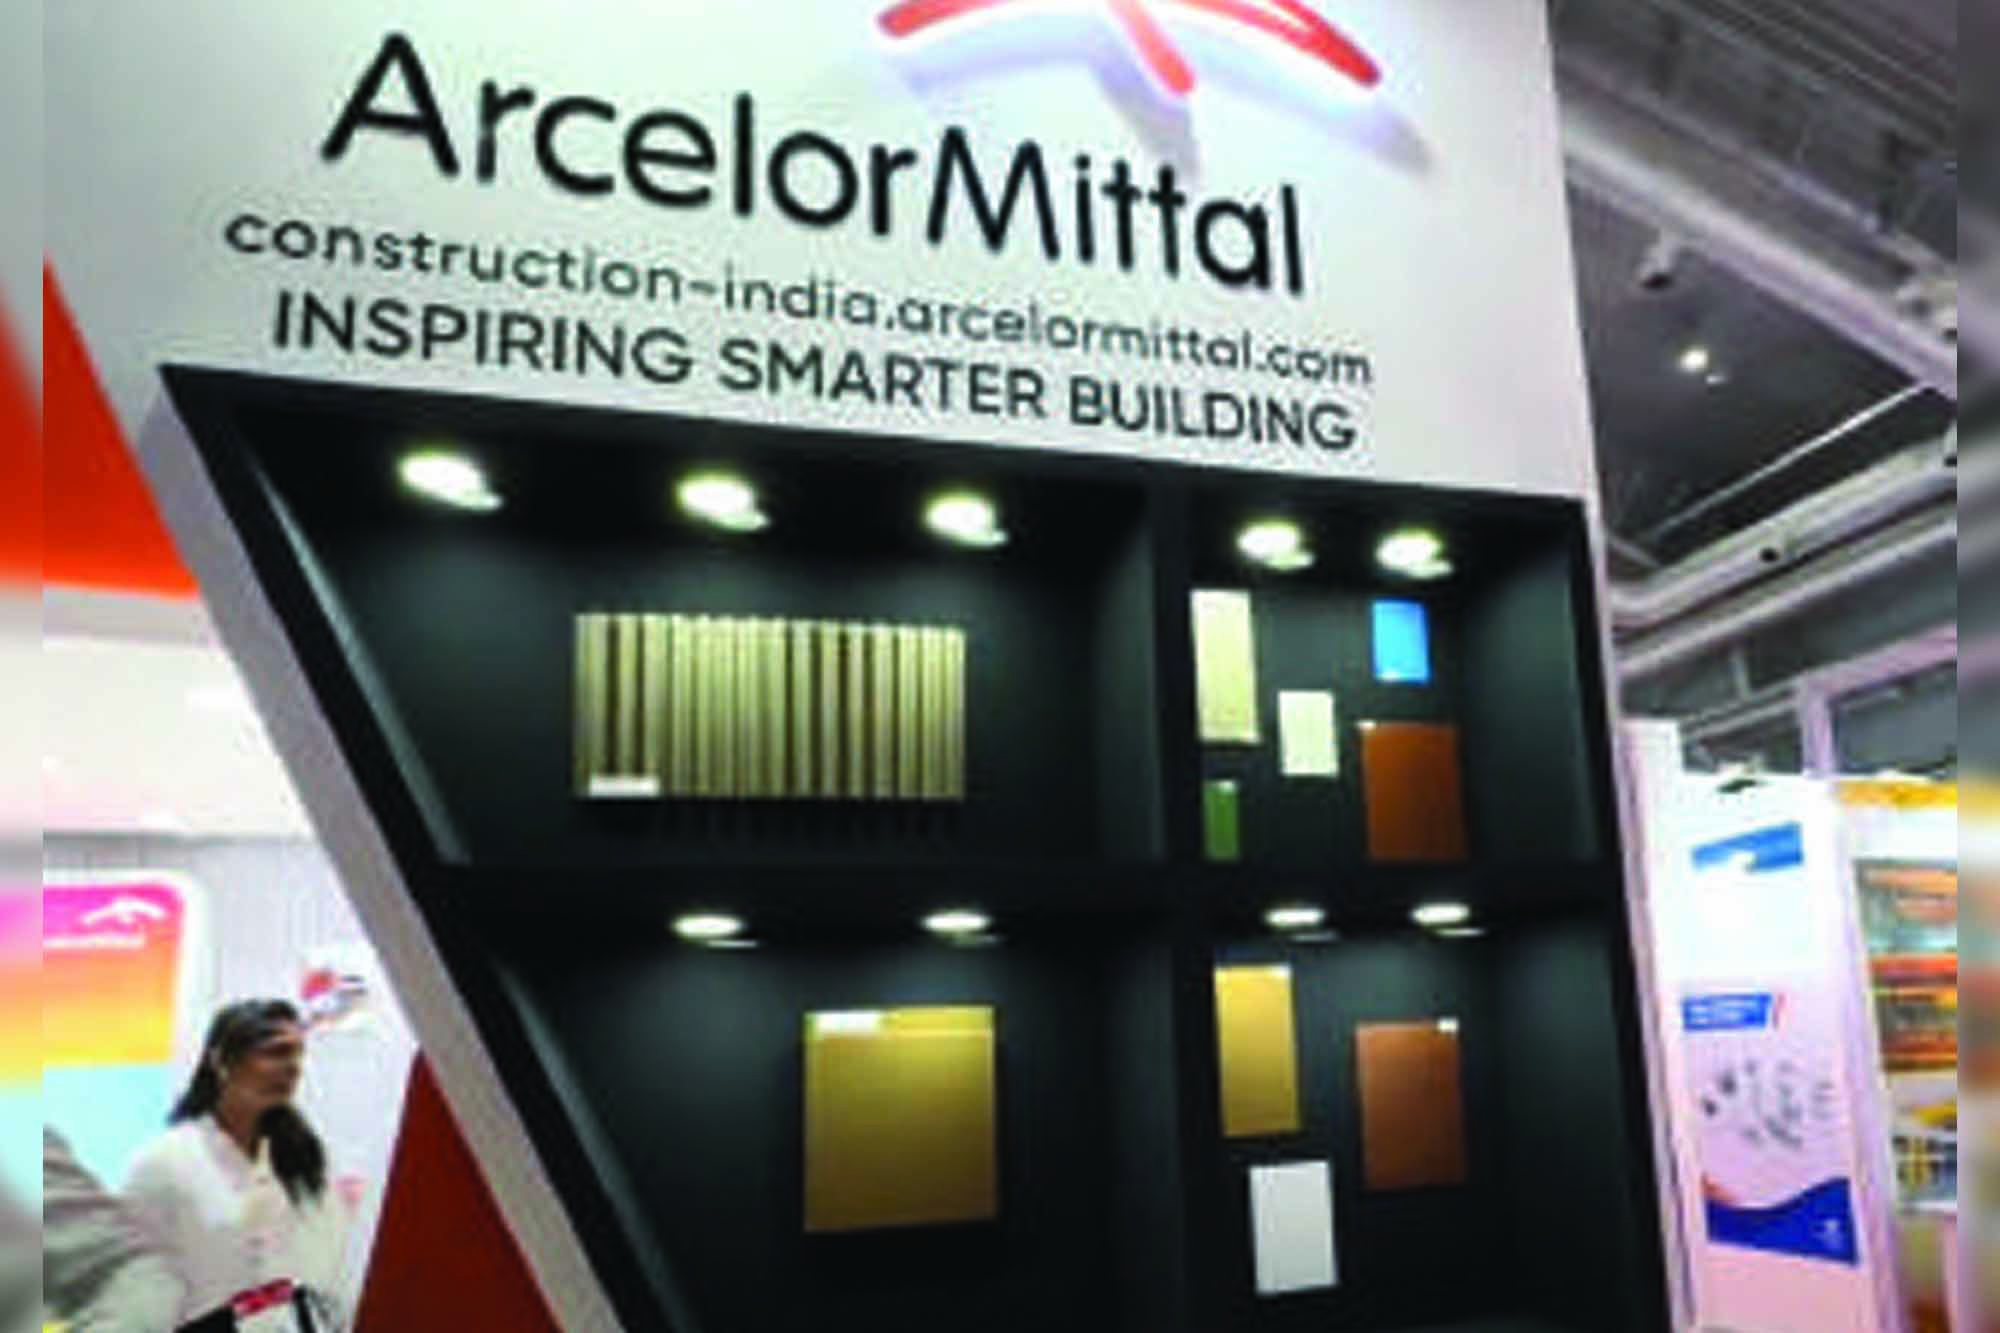 In this interview, Amit Kumar, Chairman of the Board, ArcelorMittal Construction India Pvt Ltd, says that by highlighting their products' long-term benefits, such as energy savings and faster installation, they demonstrate their superior value proposition.